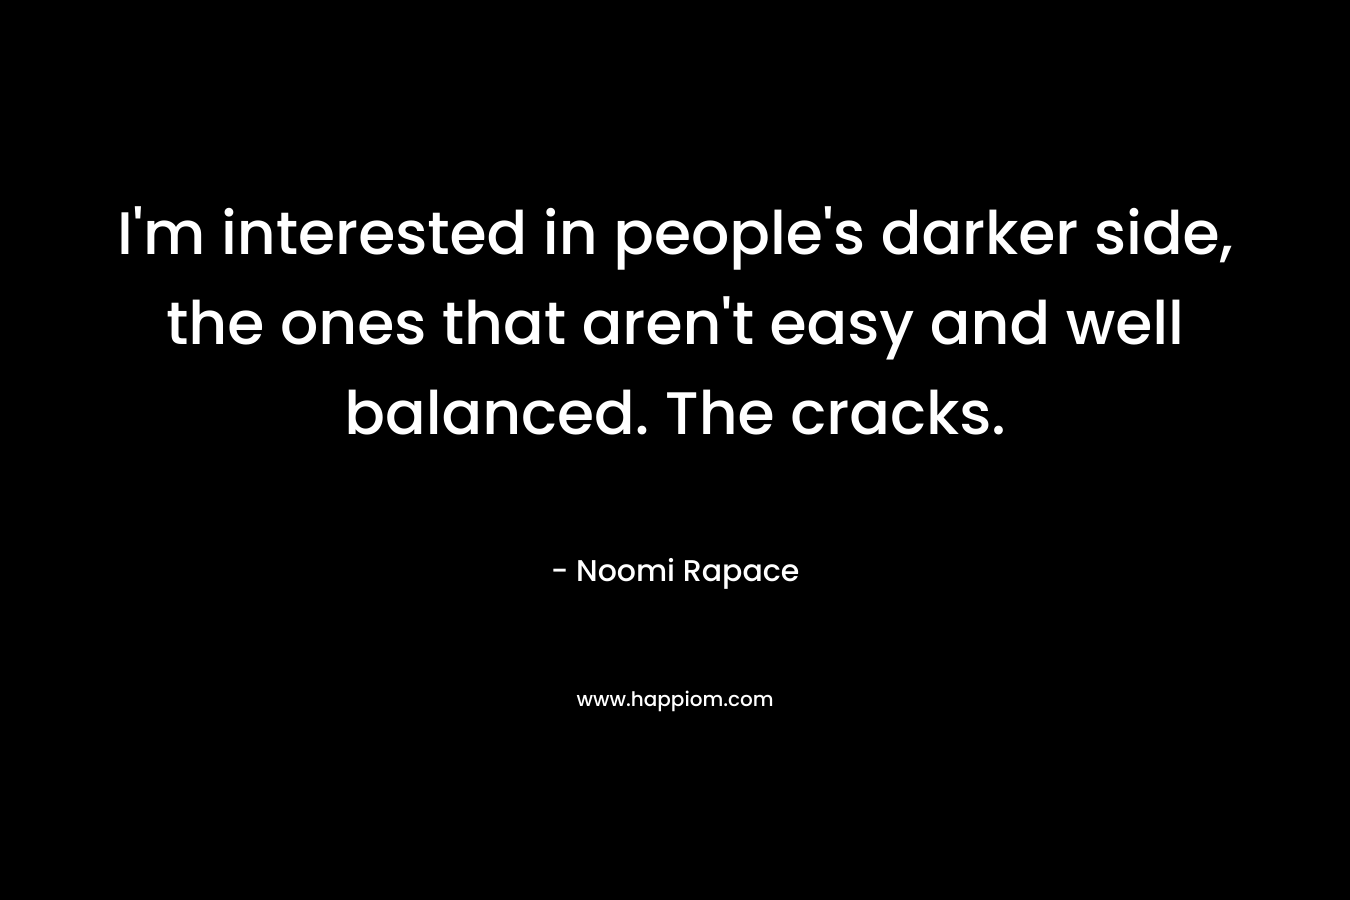 I'm interested in people's darker side, the ones that aren't easy and well balanced. The cracks.